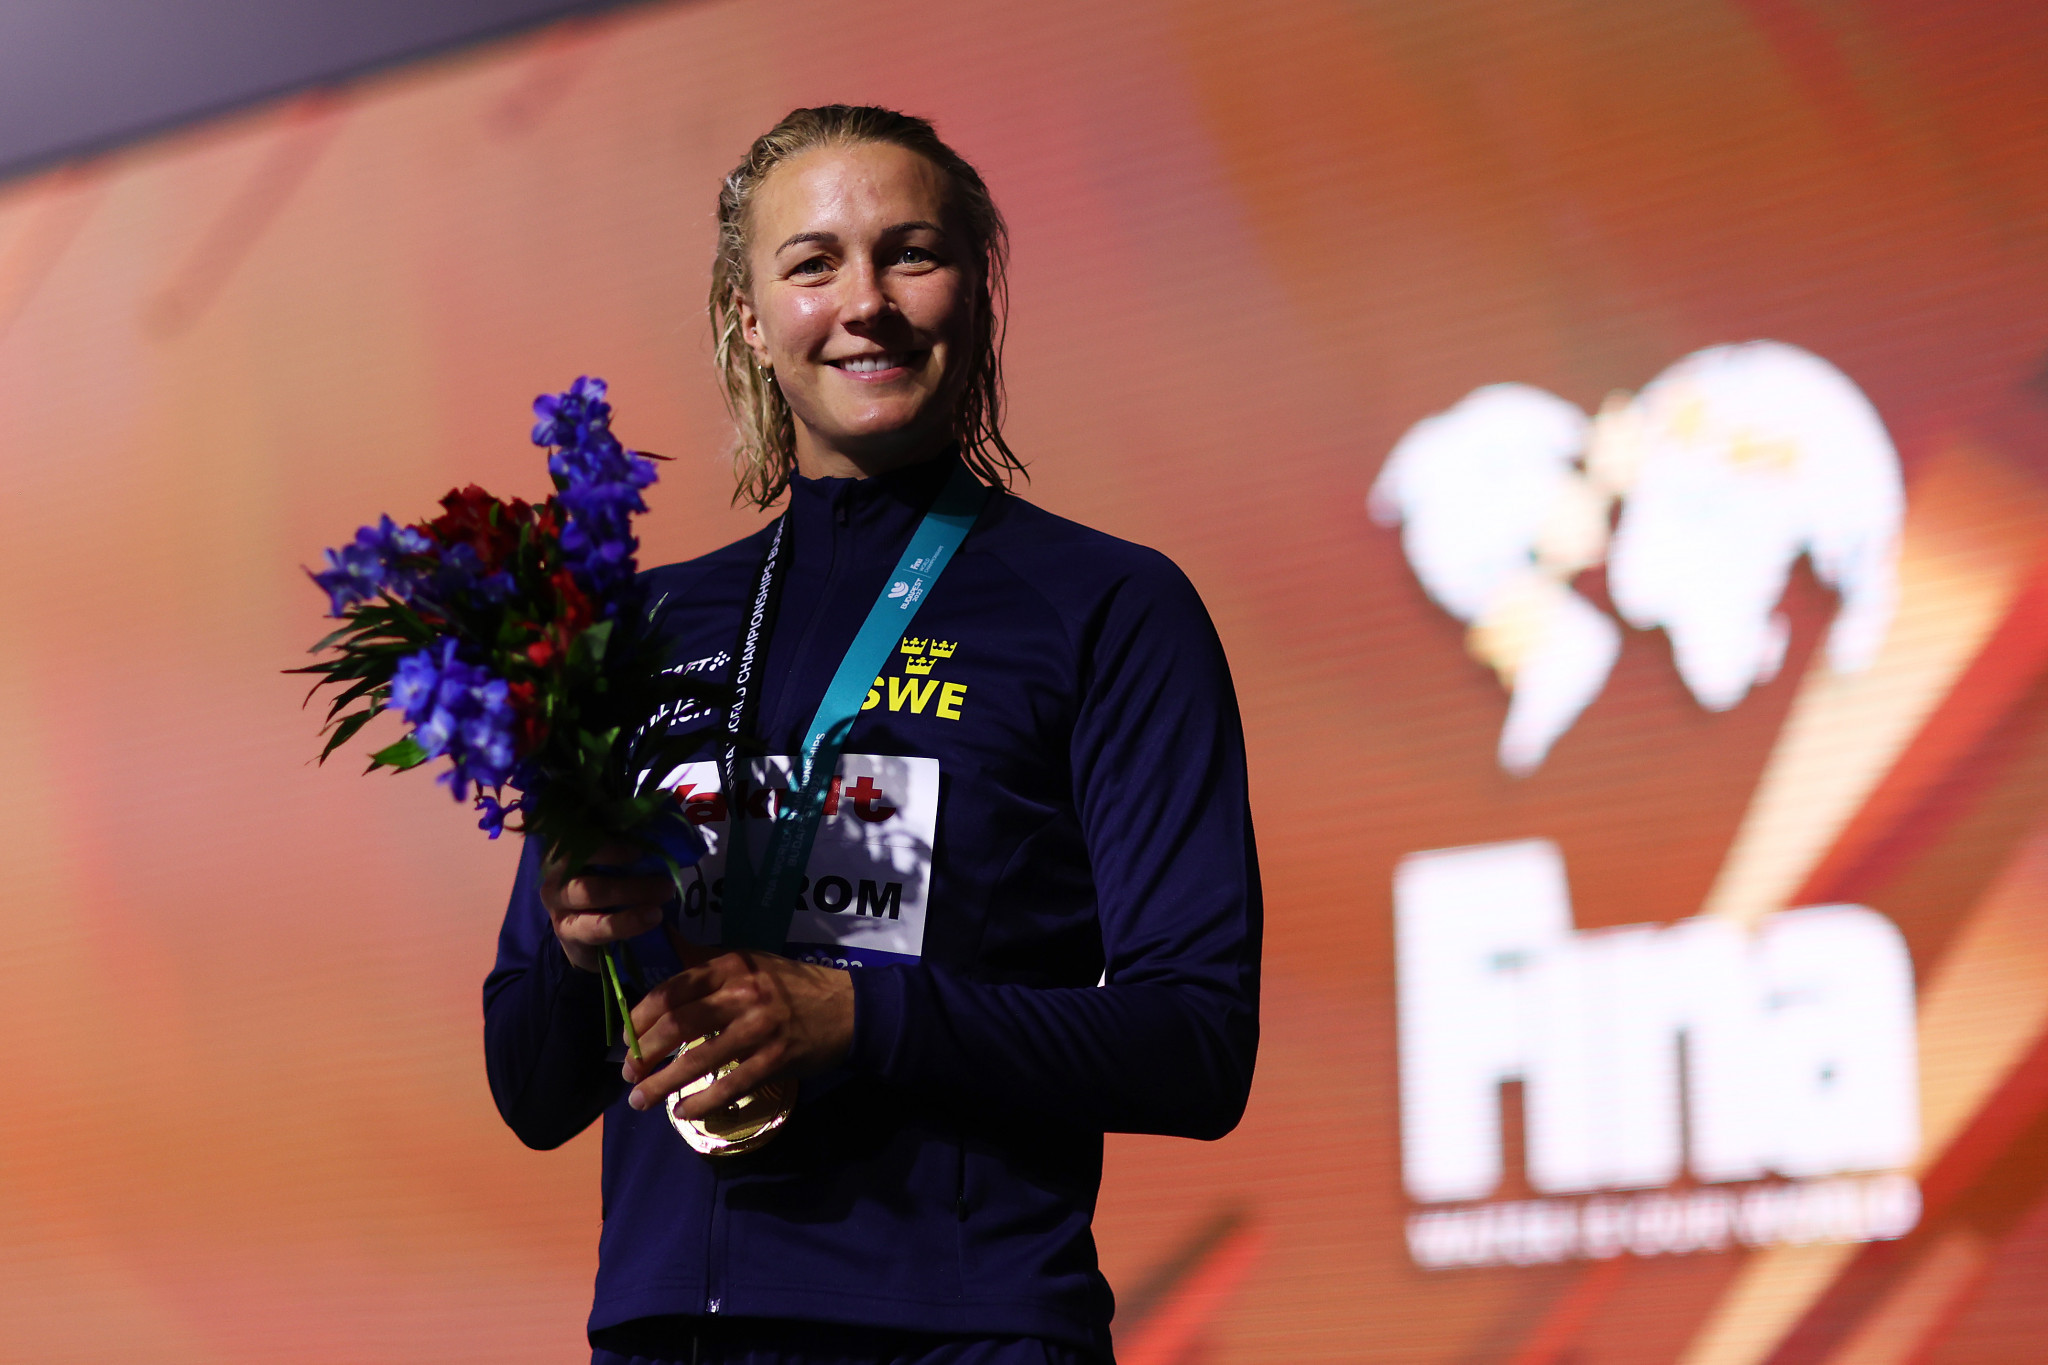 Sarah Sjöström of Sweden is now just two short of American Michael Phelps' record 20 individual medals at the FINA World Championships ©Getty Images